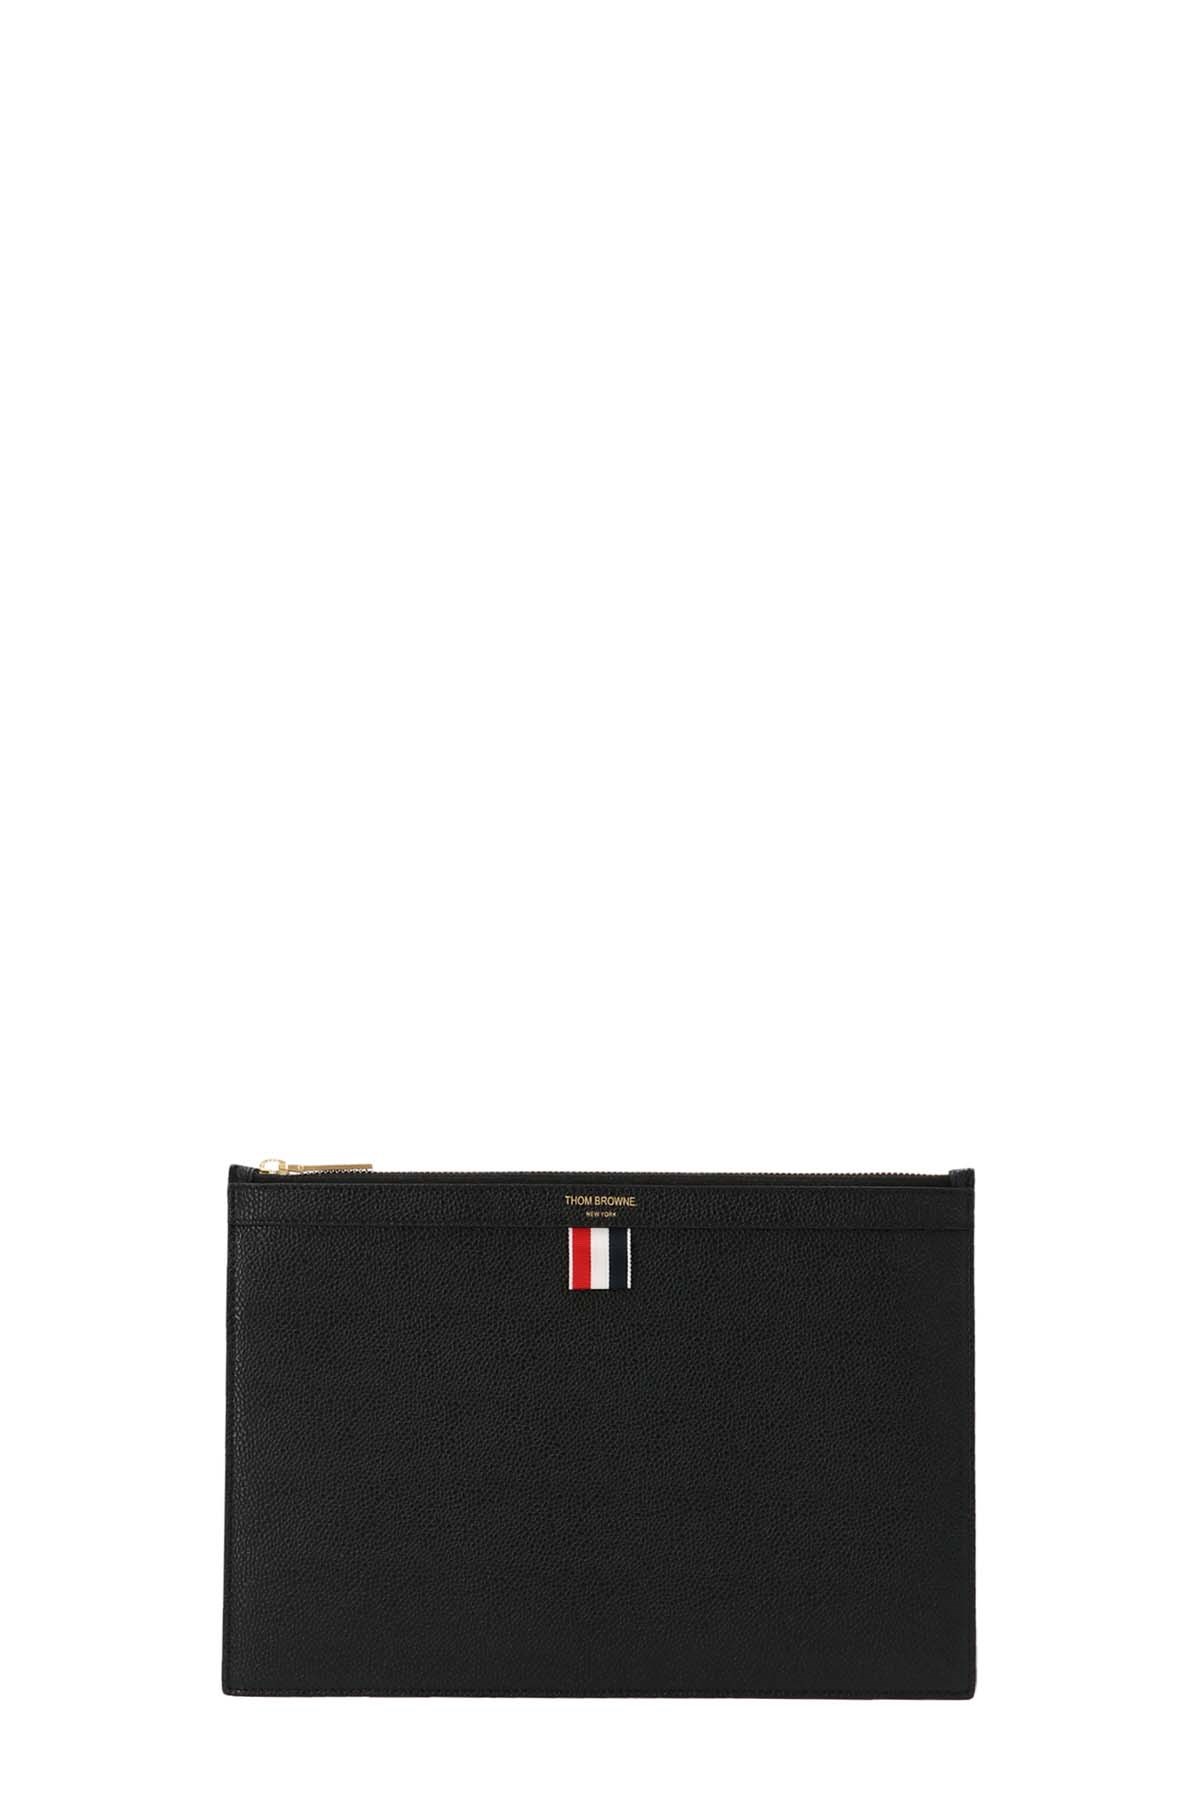 THOM BROWNE Small Document Holder